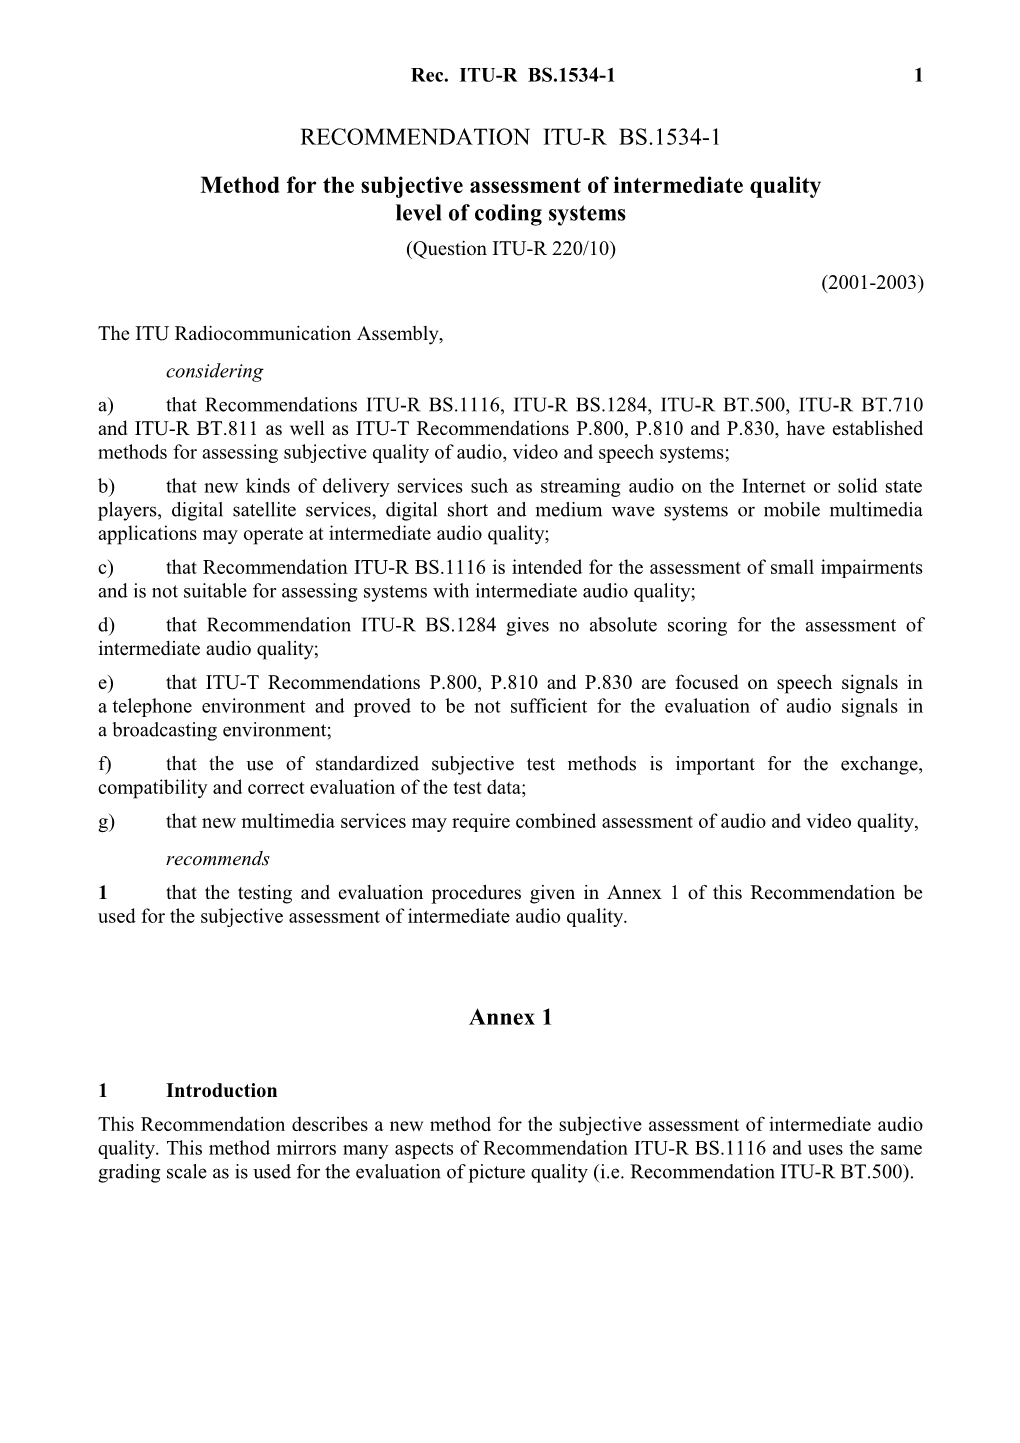 RECOMMENDATION ITU-R BS.1534-1 - Method for the Subjective Assessment of Intermediate Quality